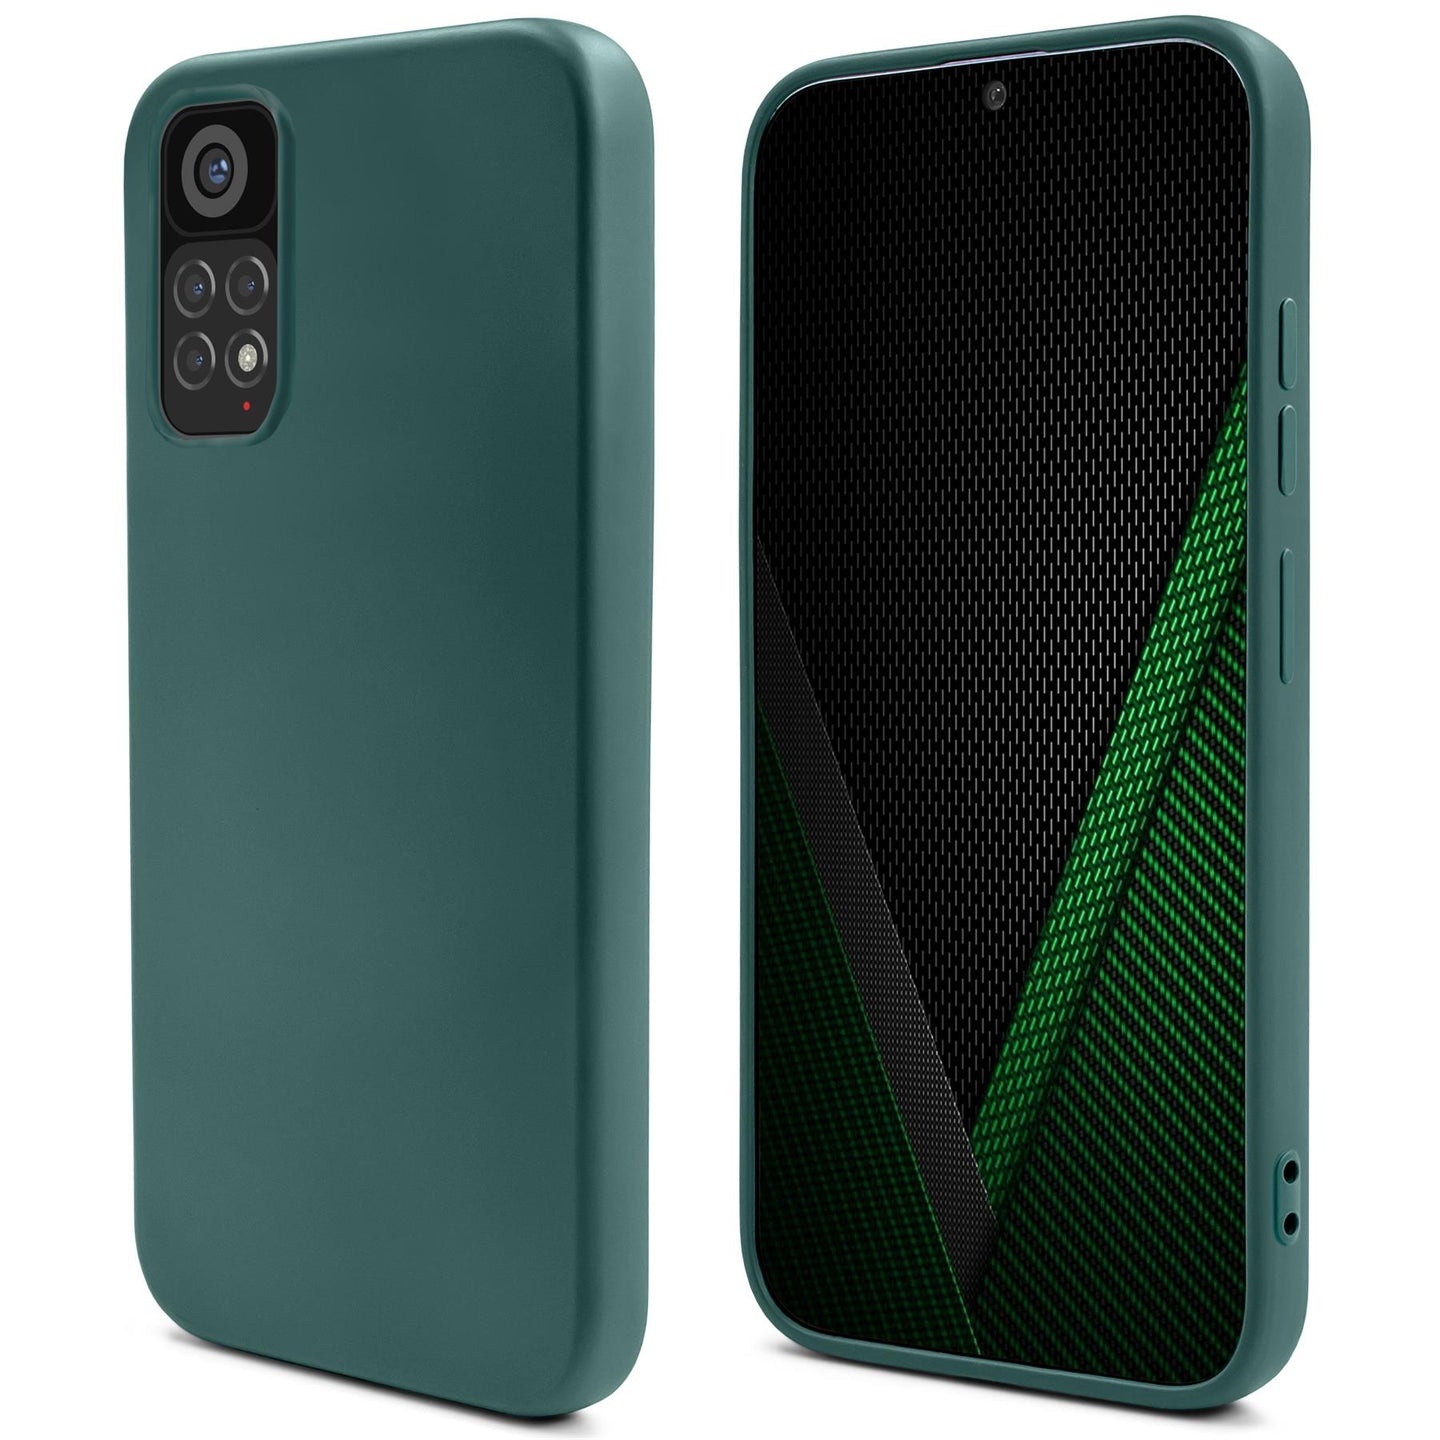 Moozy Lifestyle. Silicone Case for Xiaomi Redmi Note 11 Pro 5G and 4G, Dark Green - Liquid Silicone Lightweight Cover with Matte Finish and Soft Microfiber Lining, Premium Silicone Case